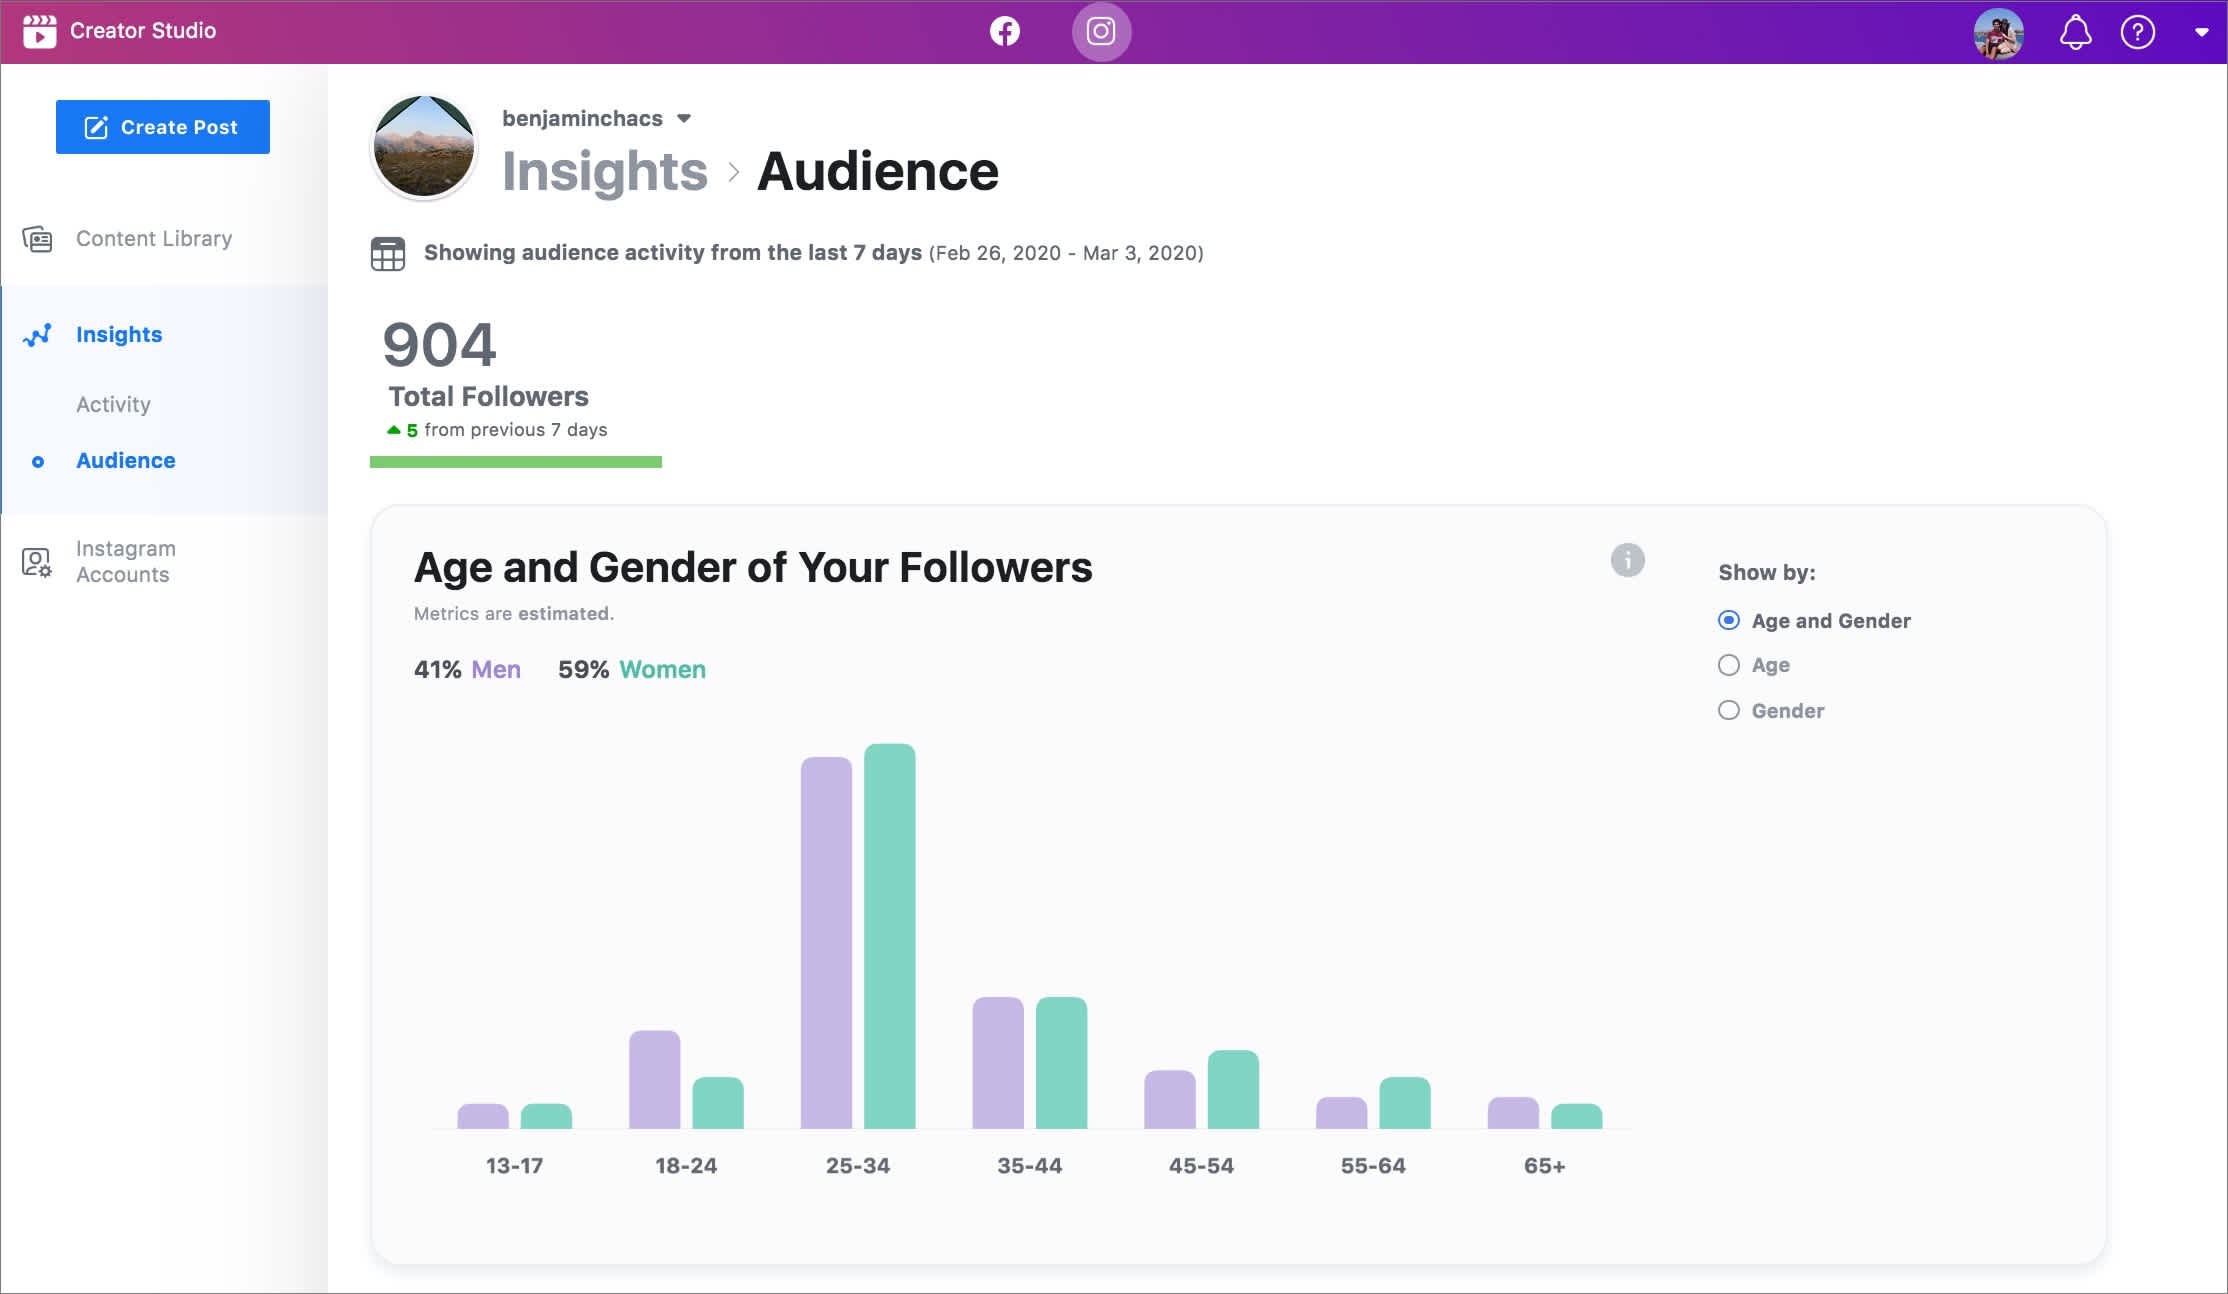 Can view audience Insights with information about followers and audience.